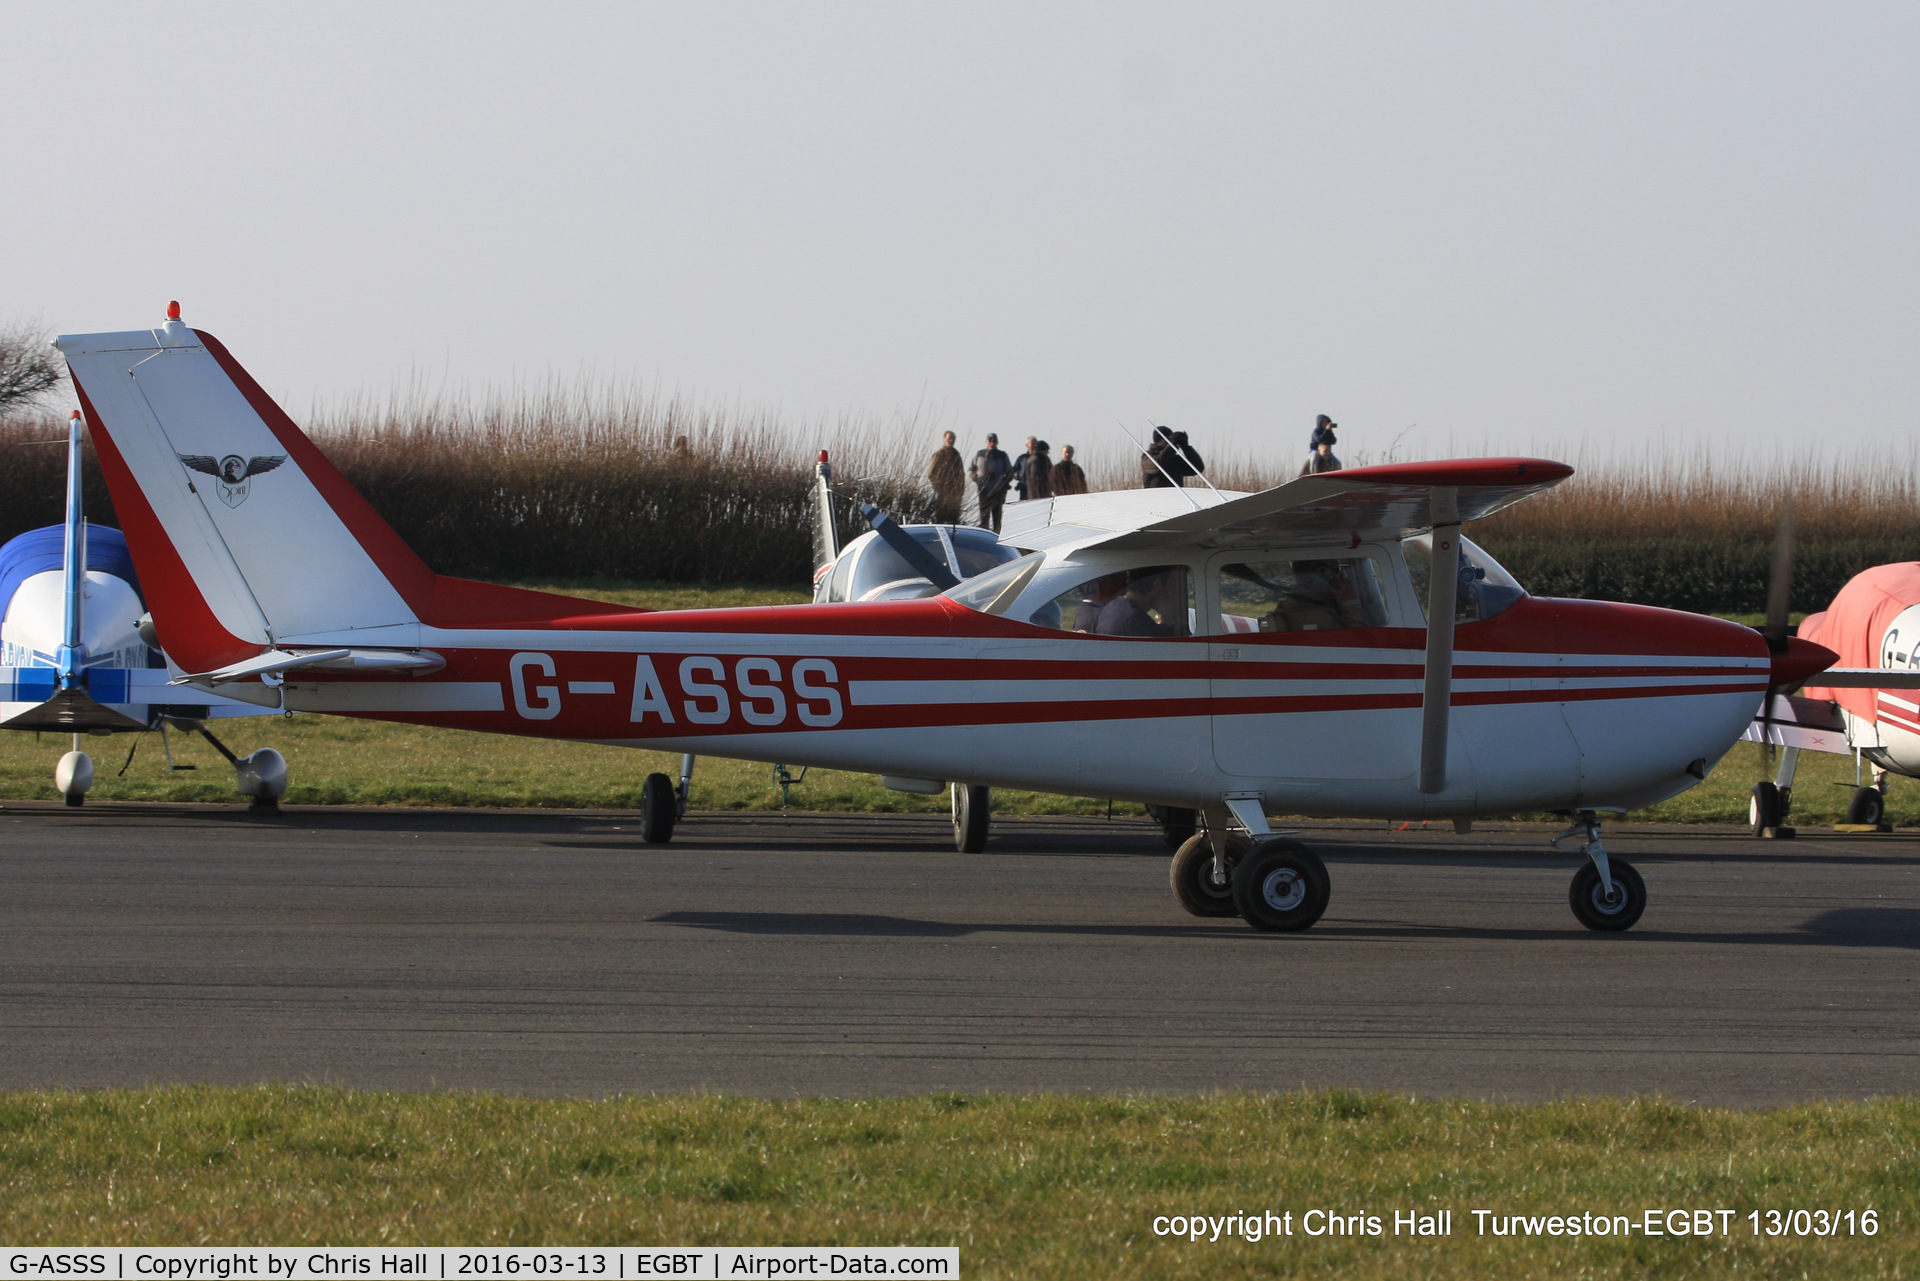 G-ASSS, 1964 Cessna 172E C/N 172-51467, at the Vintage Aircraft Club spring rally